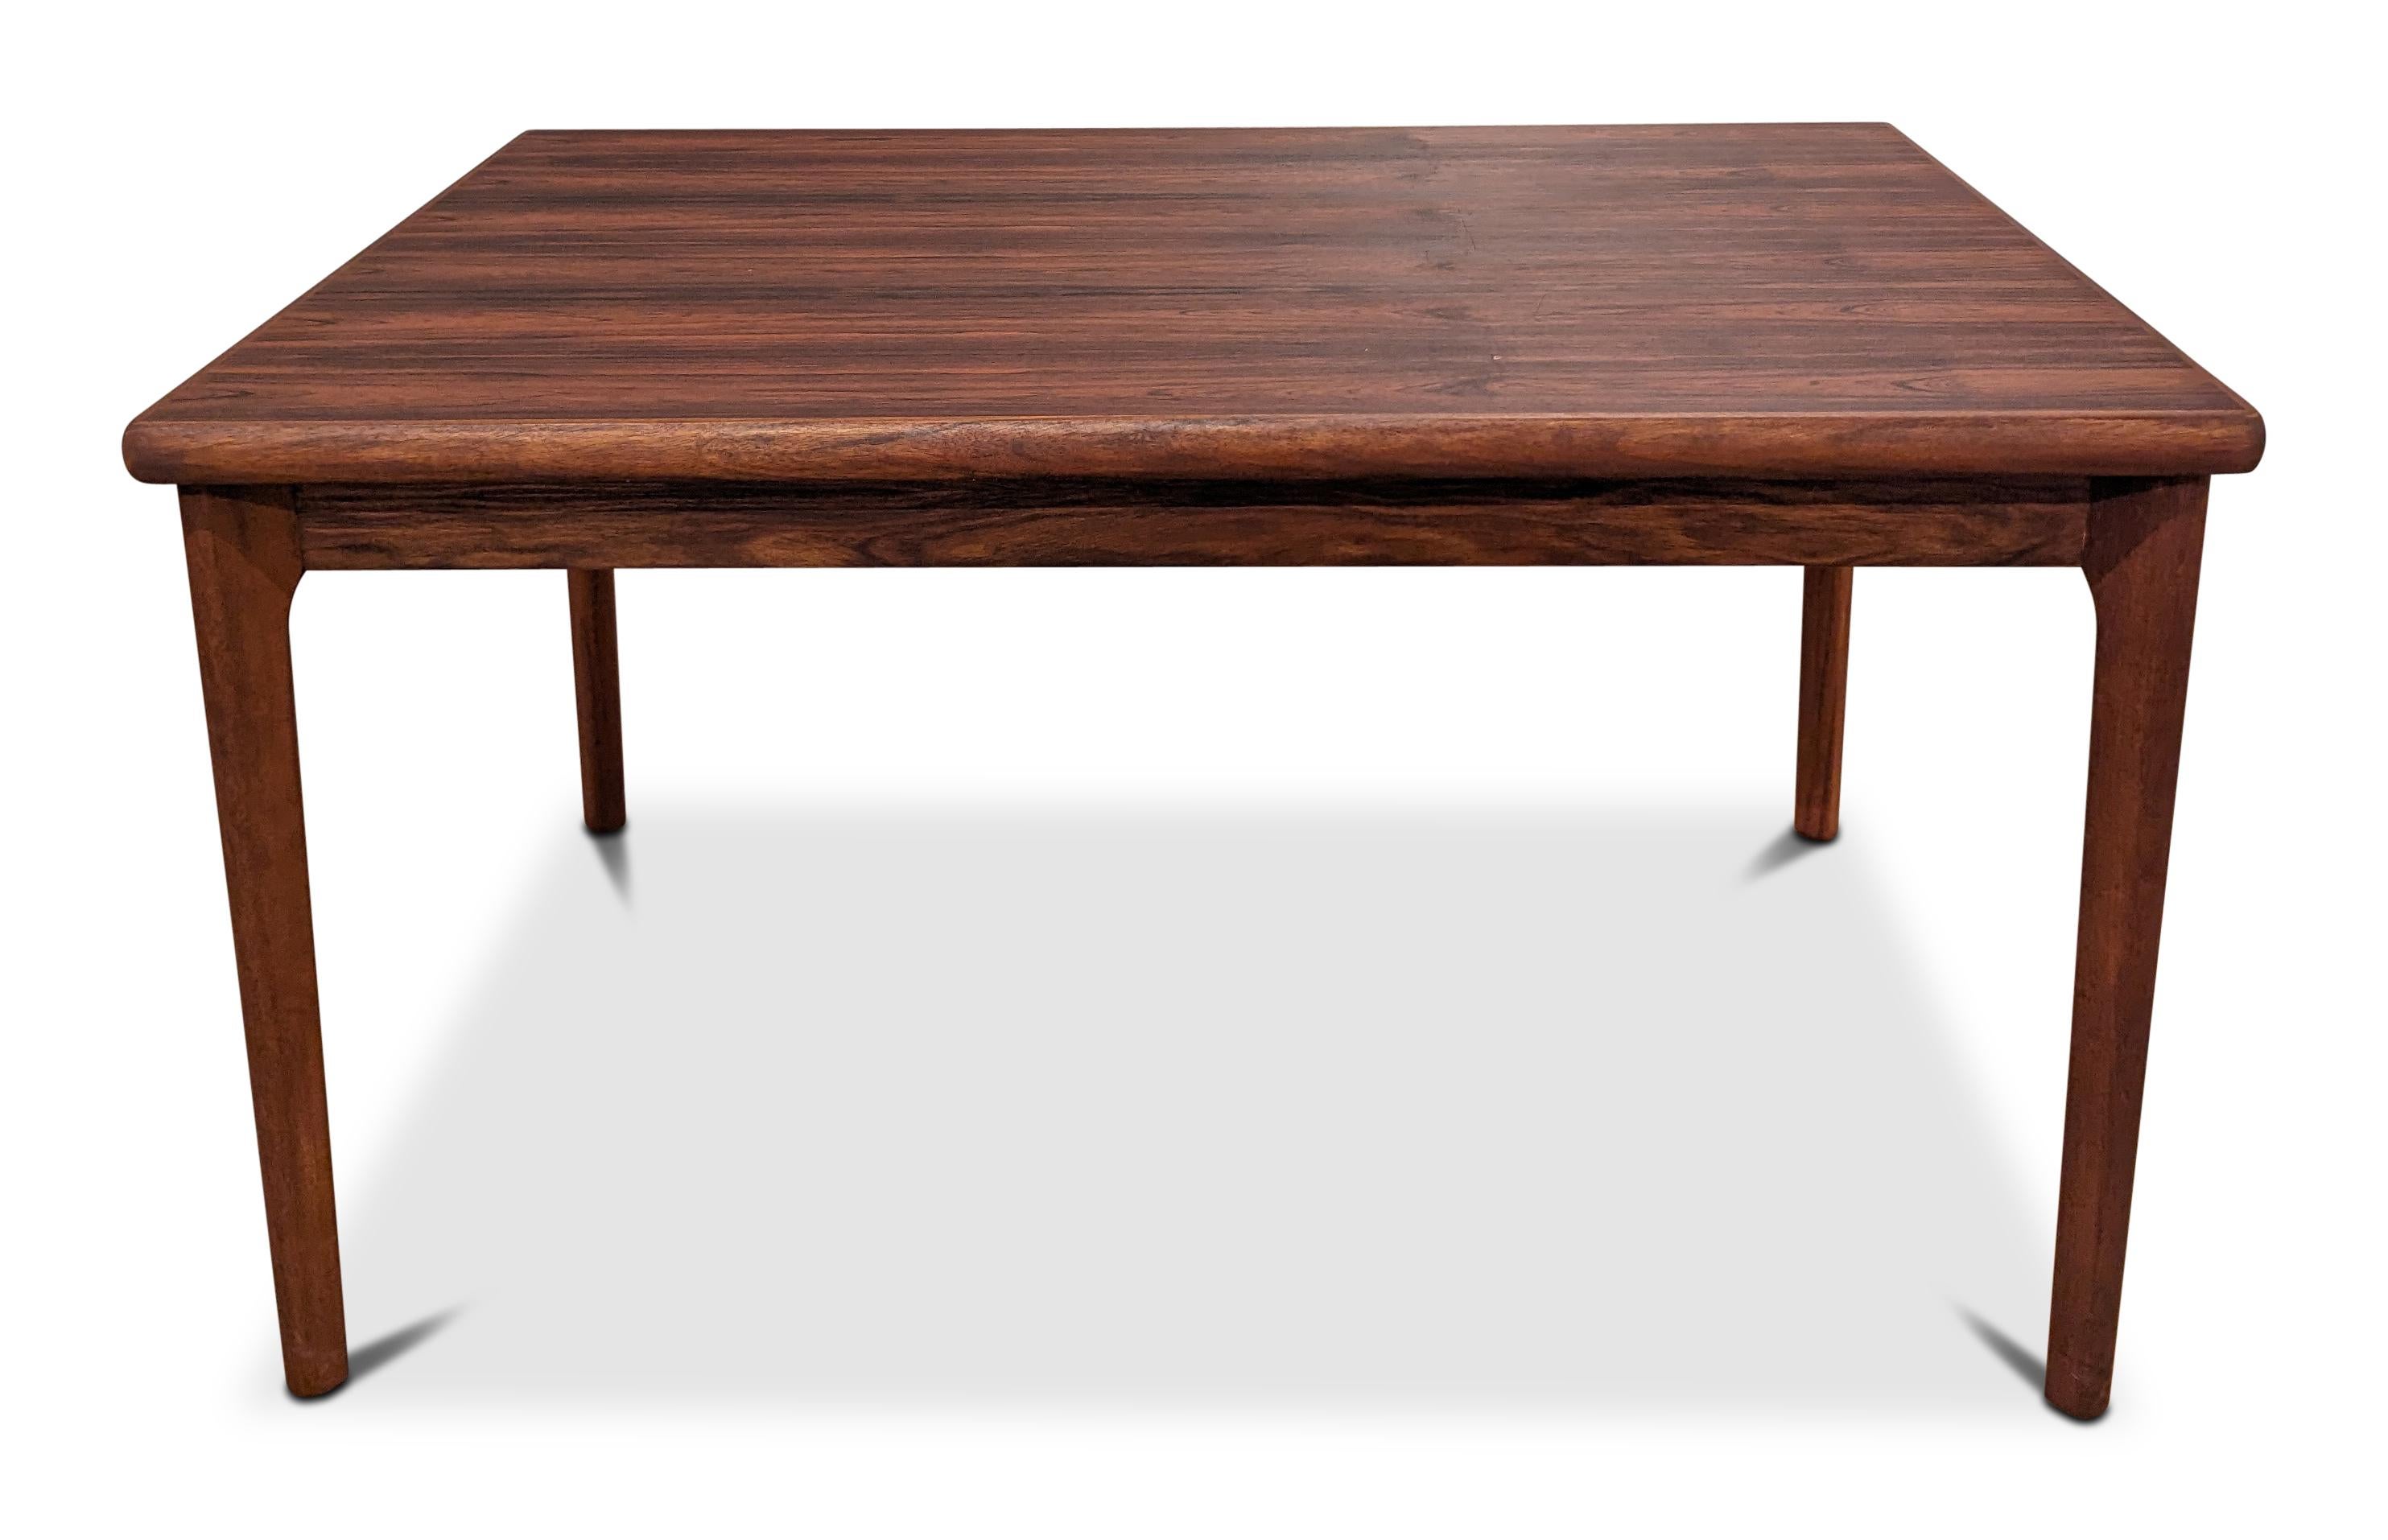 Henry Kjernulf Rosewood Dining Table - 022405 Vintage Danish In Good Condition For Sale In Brooklyn, NY